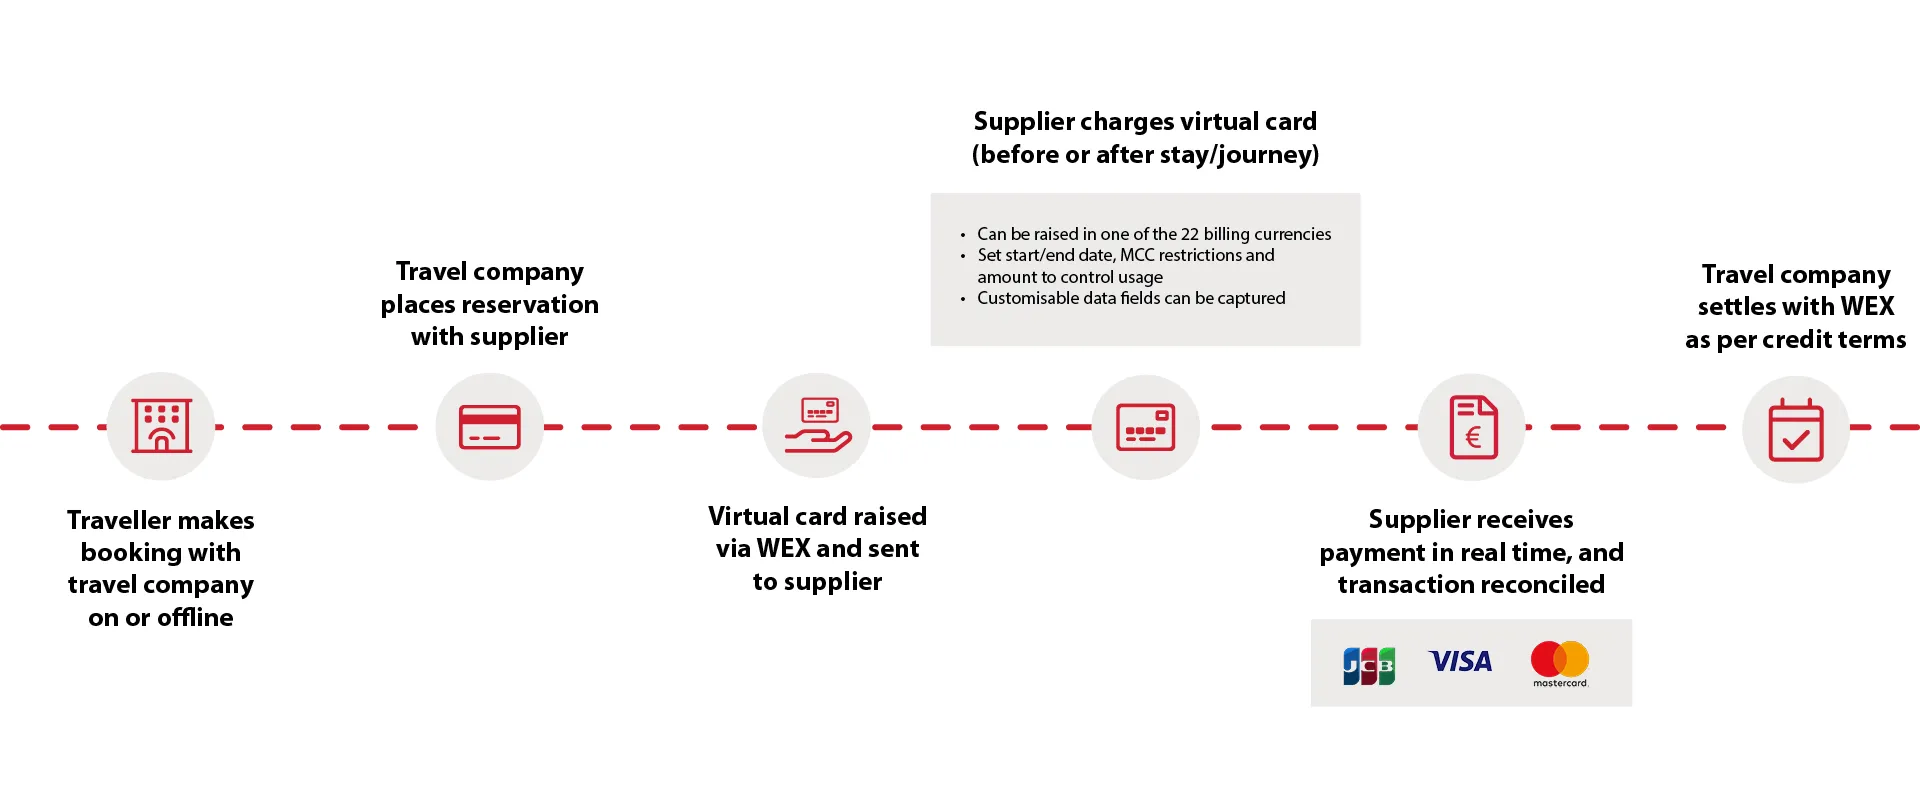 How the WEX virtual payment solution works